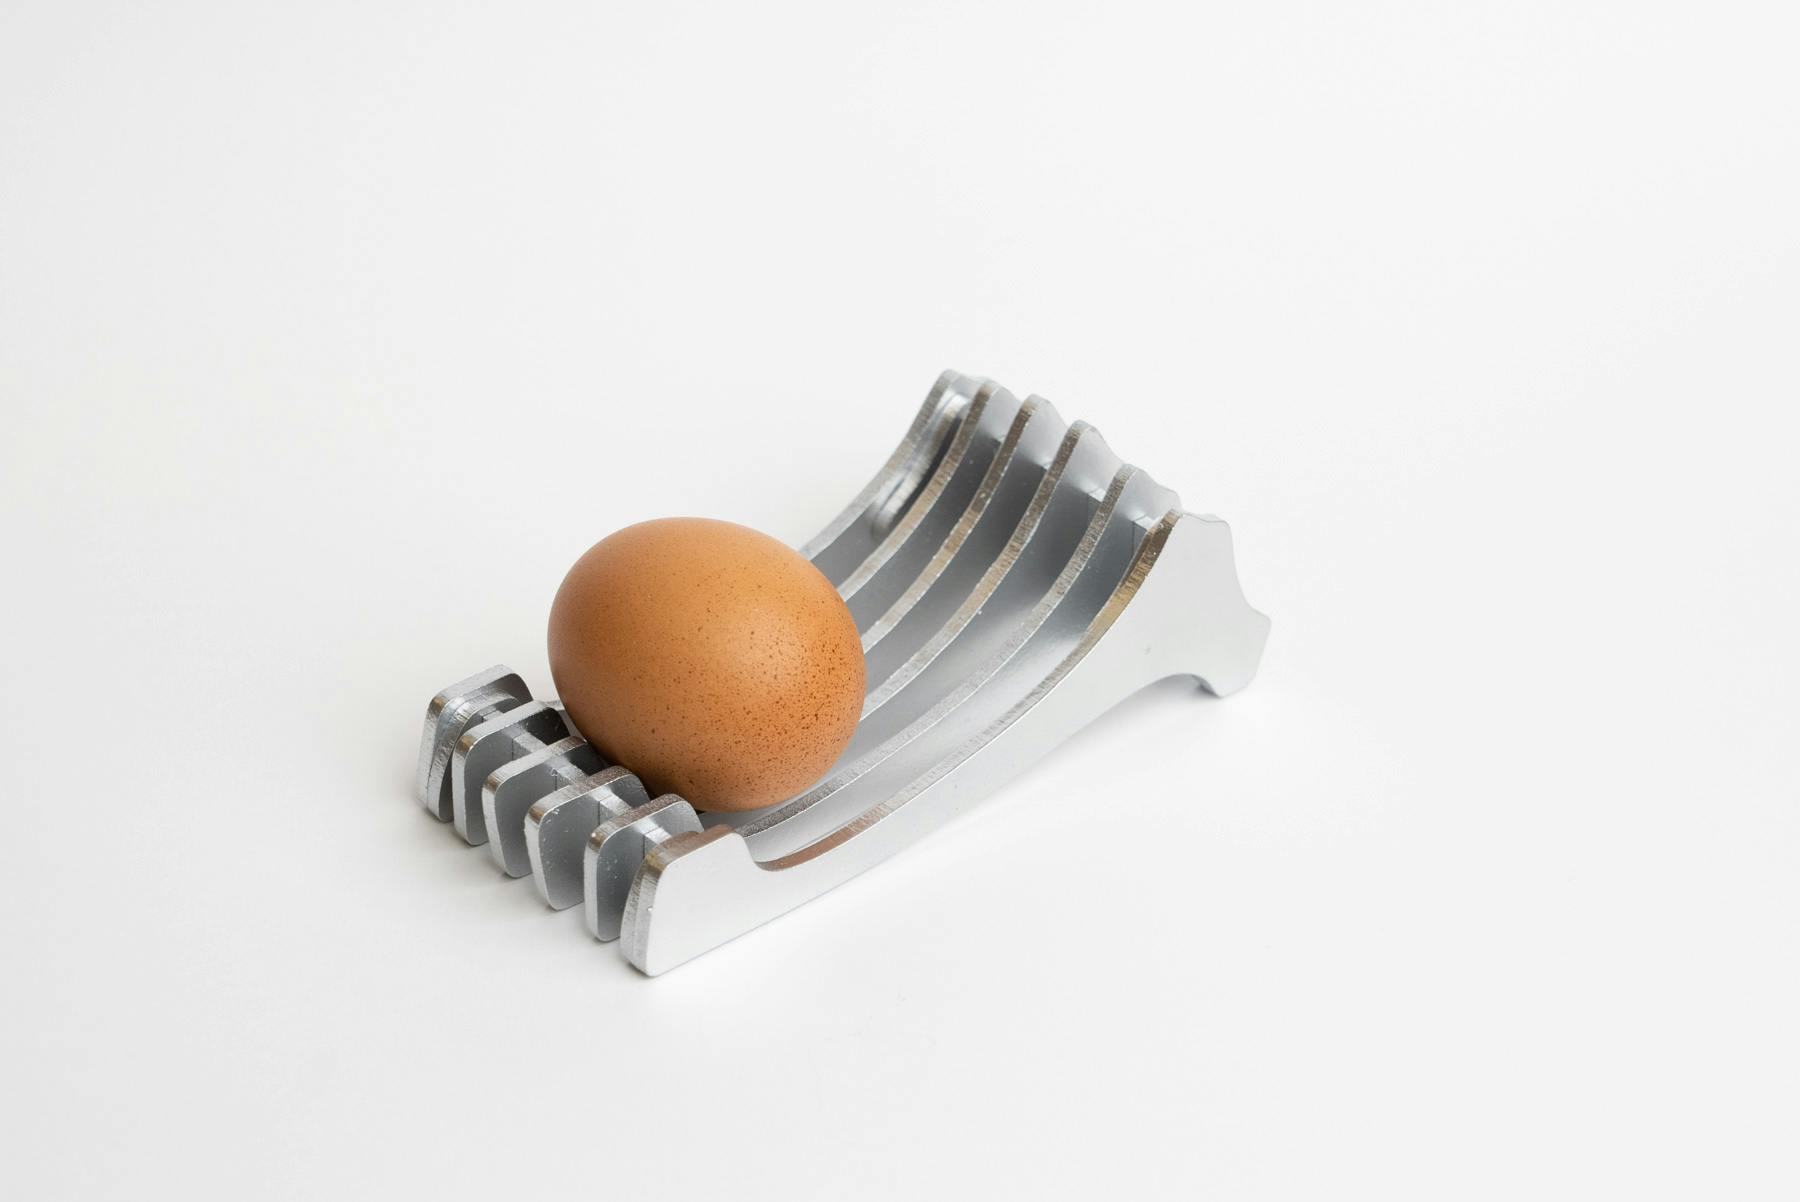 EggHolder 5, a matte silver plate-like model made of bone-like pieces, with an egg resting on it against a white background.